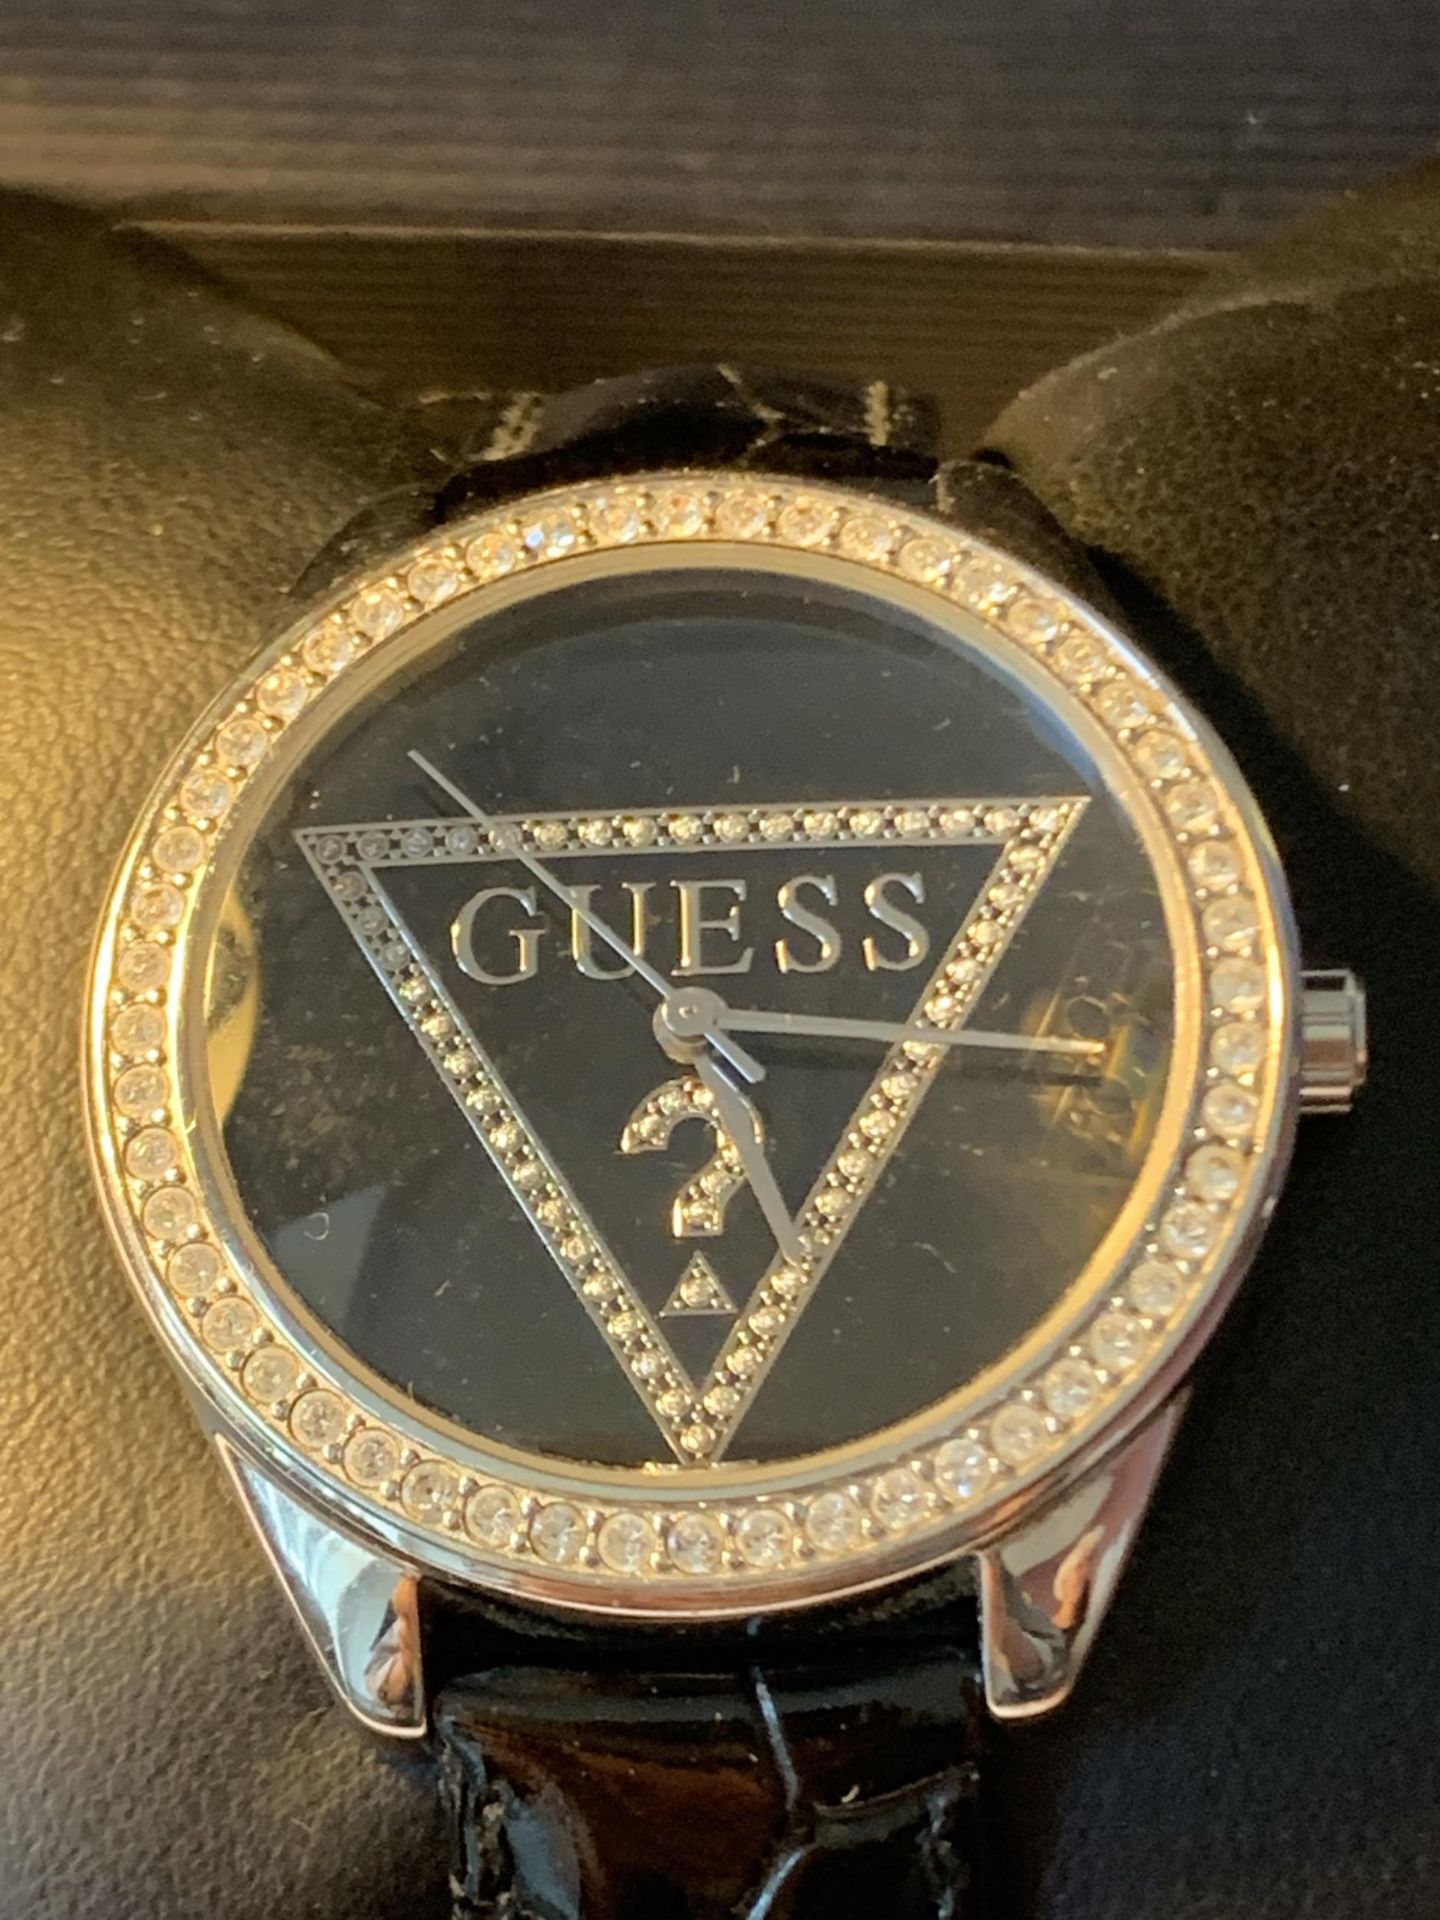 A GUESS WRISTWATCH IN A PRESENTATION BOX SEEN WORKING BUT NO WARRANTY - Image 2 of 2